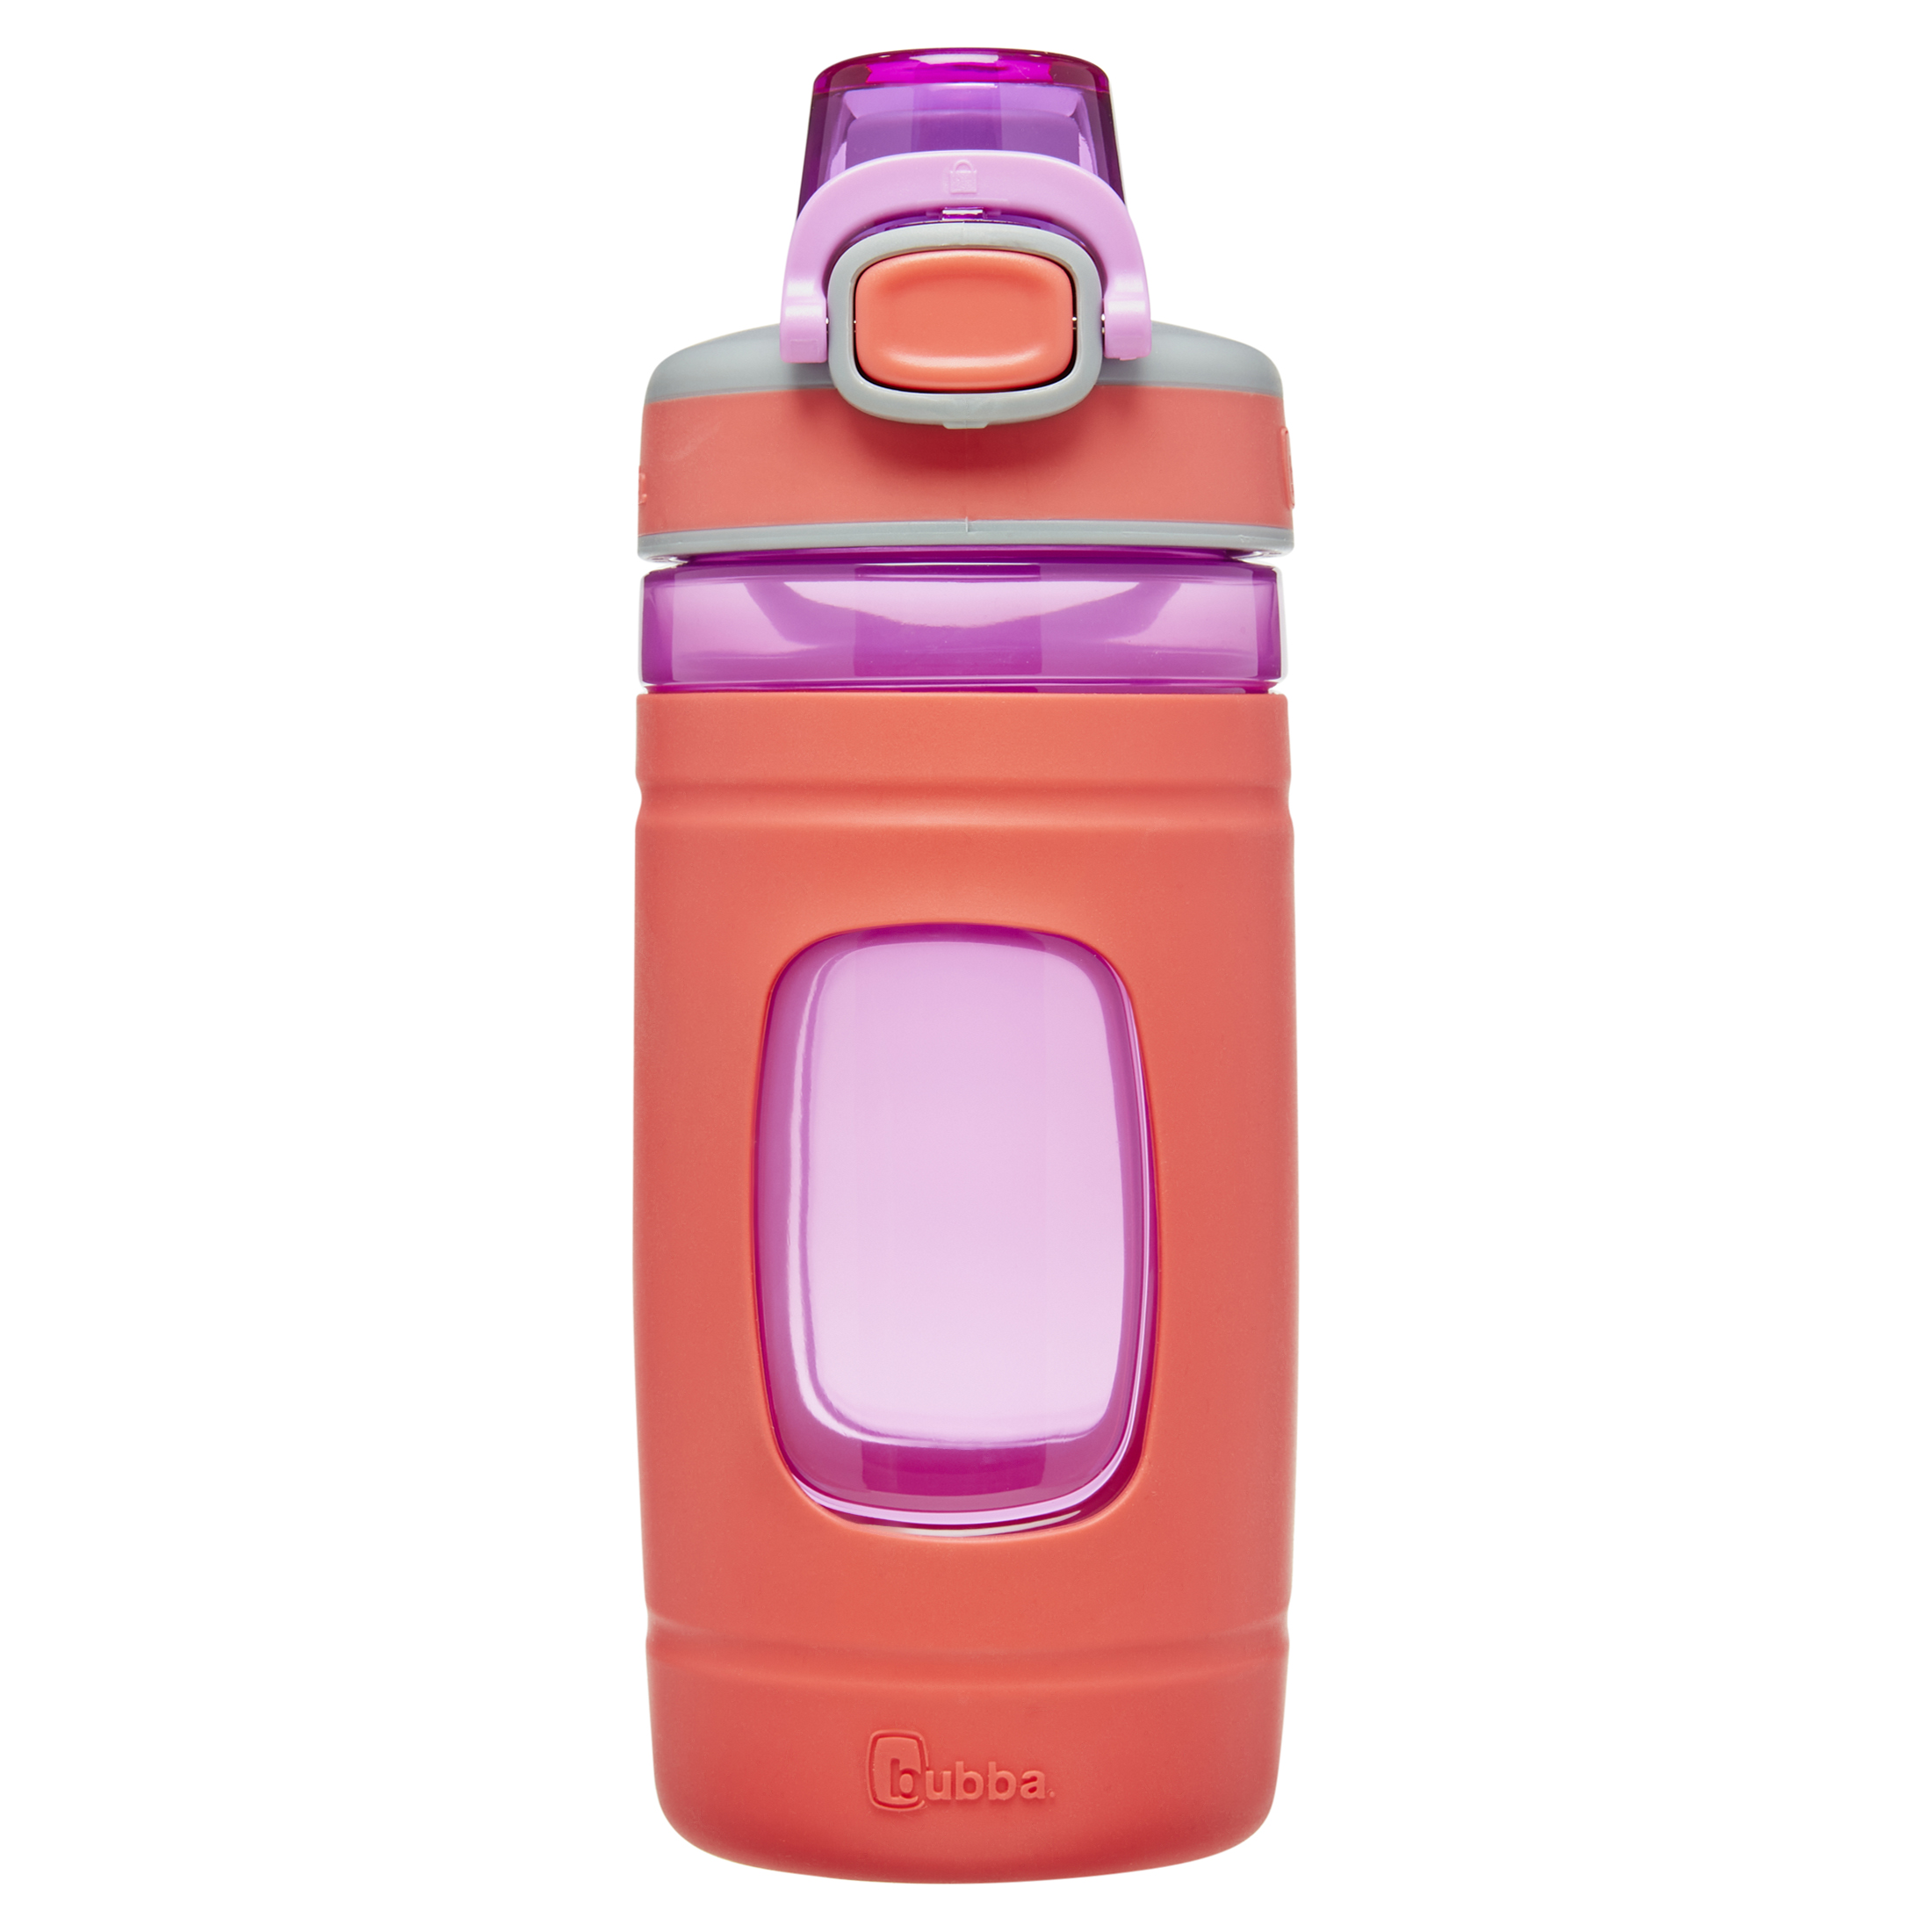 bubba Flo Kids Water Bottle Wide Mouth Lid with Silicone Sleeve Coral, 16 fl oz. - image 1 of 7